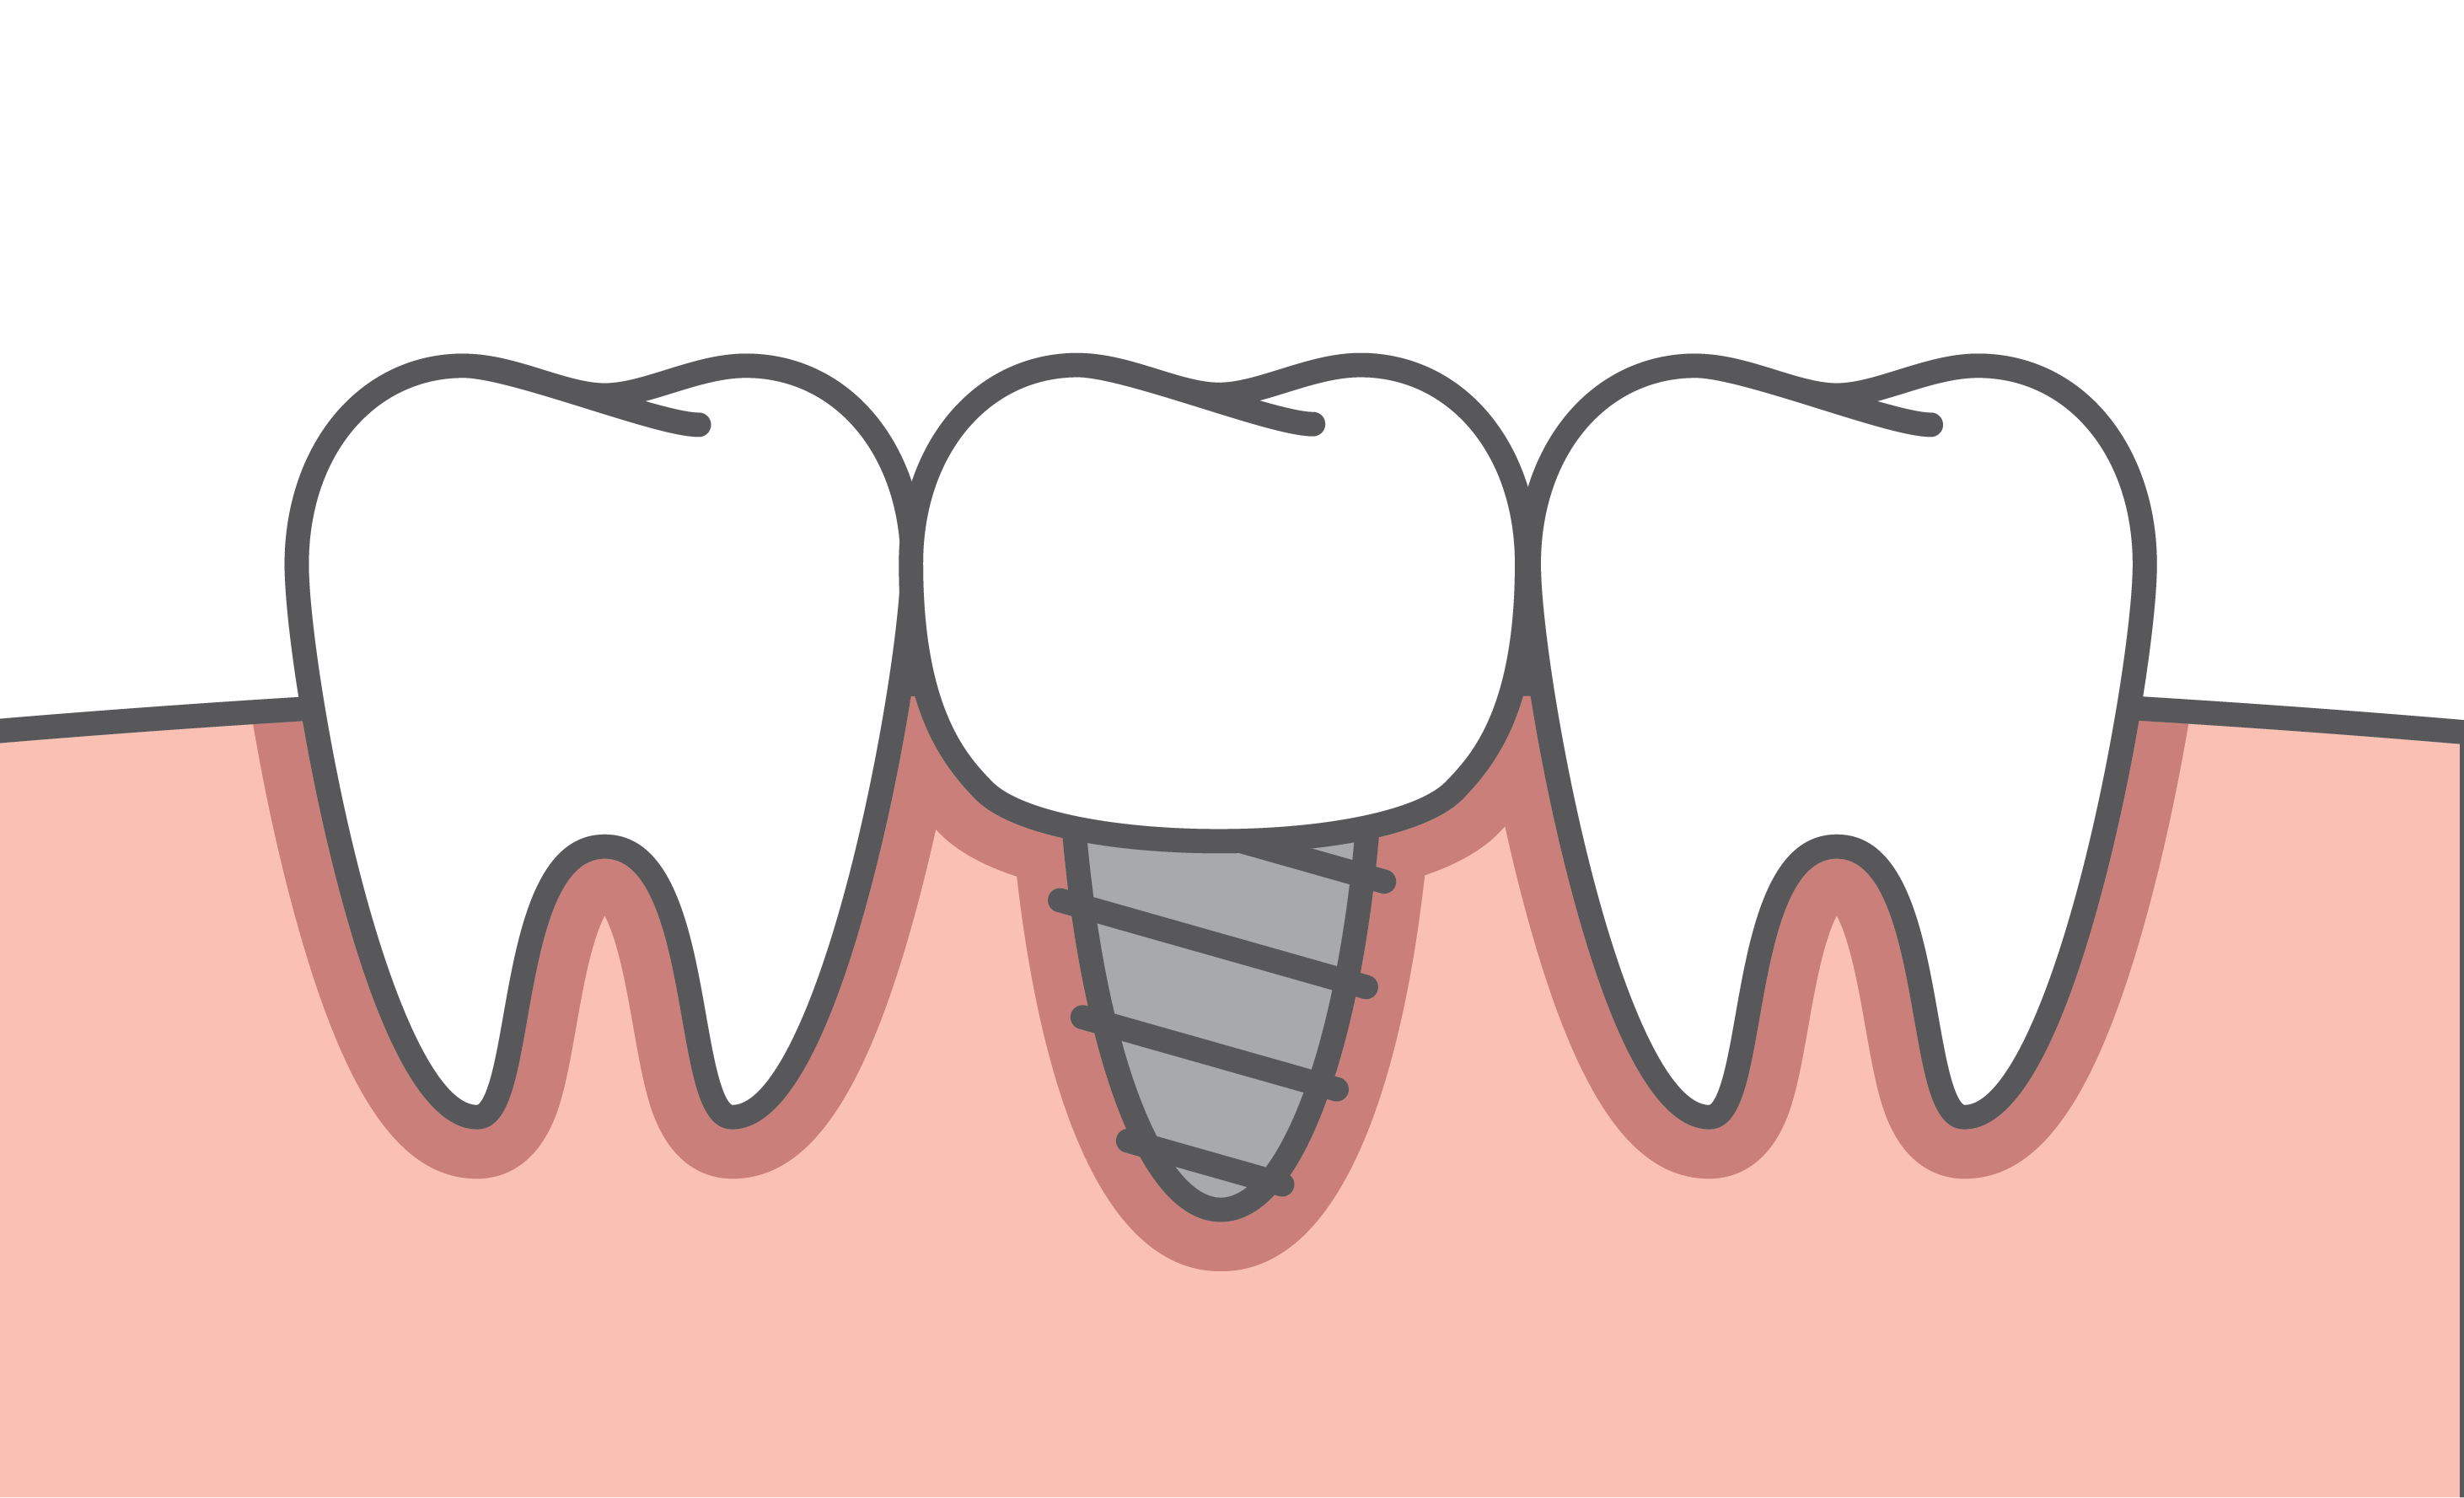 Fig 1. A single tooth is replaced with a crown supported upon a dental implant.